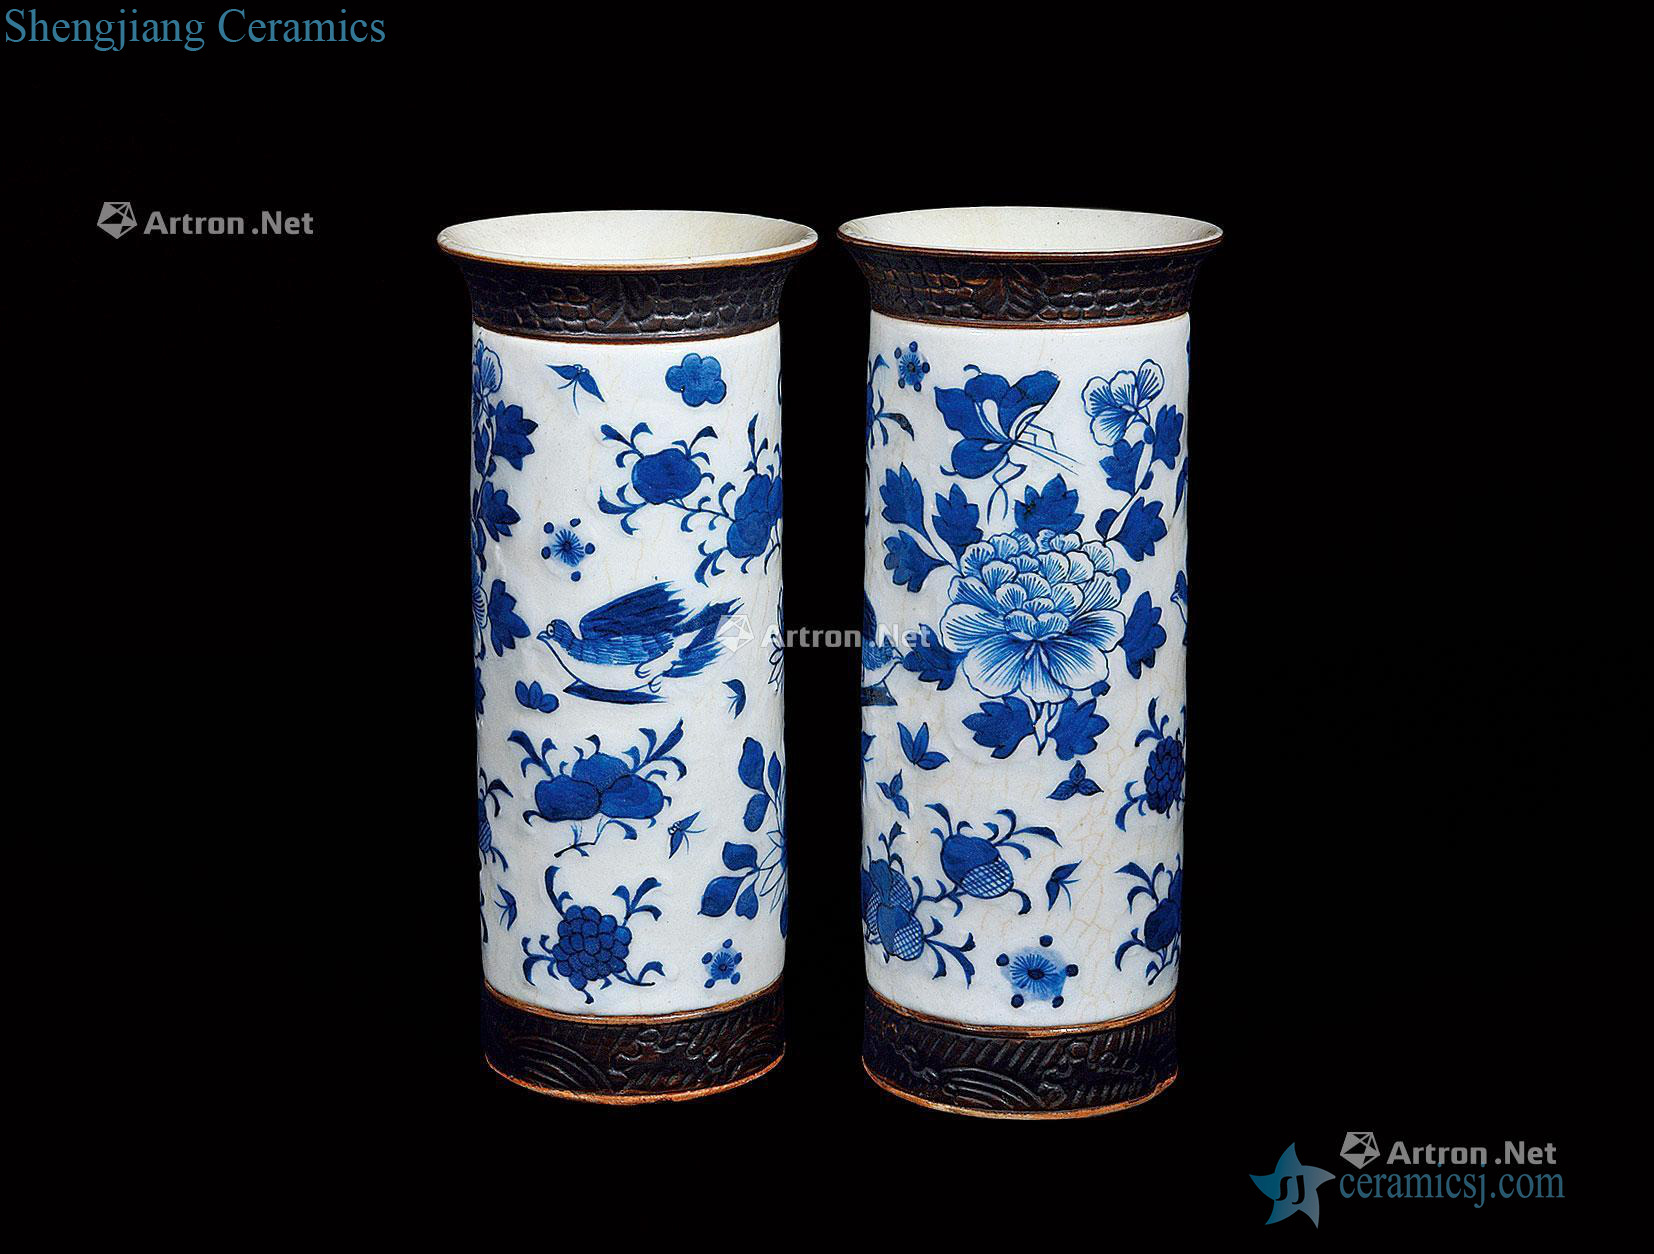 Brother qing glaze porcelain painting of flowers and flower vase with (a)